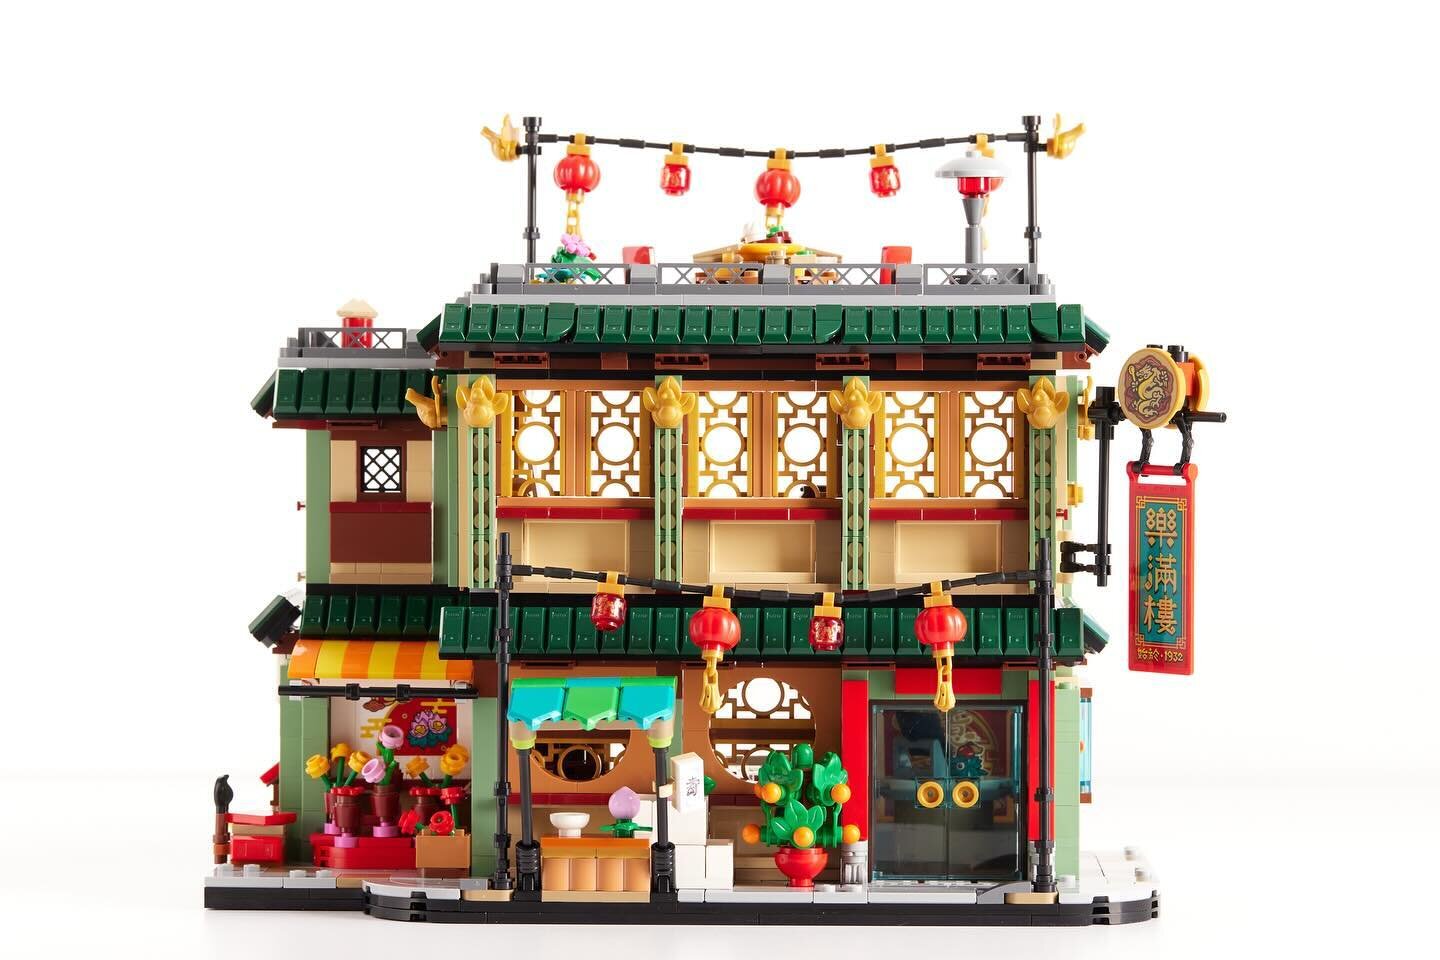 It&rsquo;s been a while since I posted. Haven&rsquo;t shot anything portfolio worthy recently but I have been building @lego as a mental health activity so here&rsquo;s a #lunarnewyear set that&rsquo;s kind of timely.